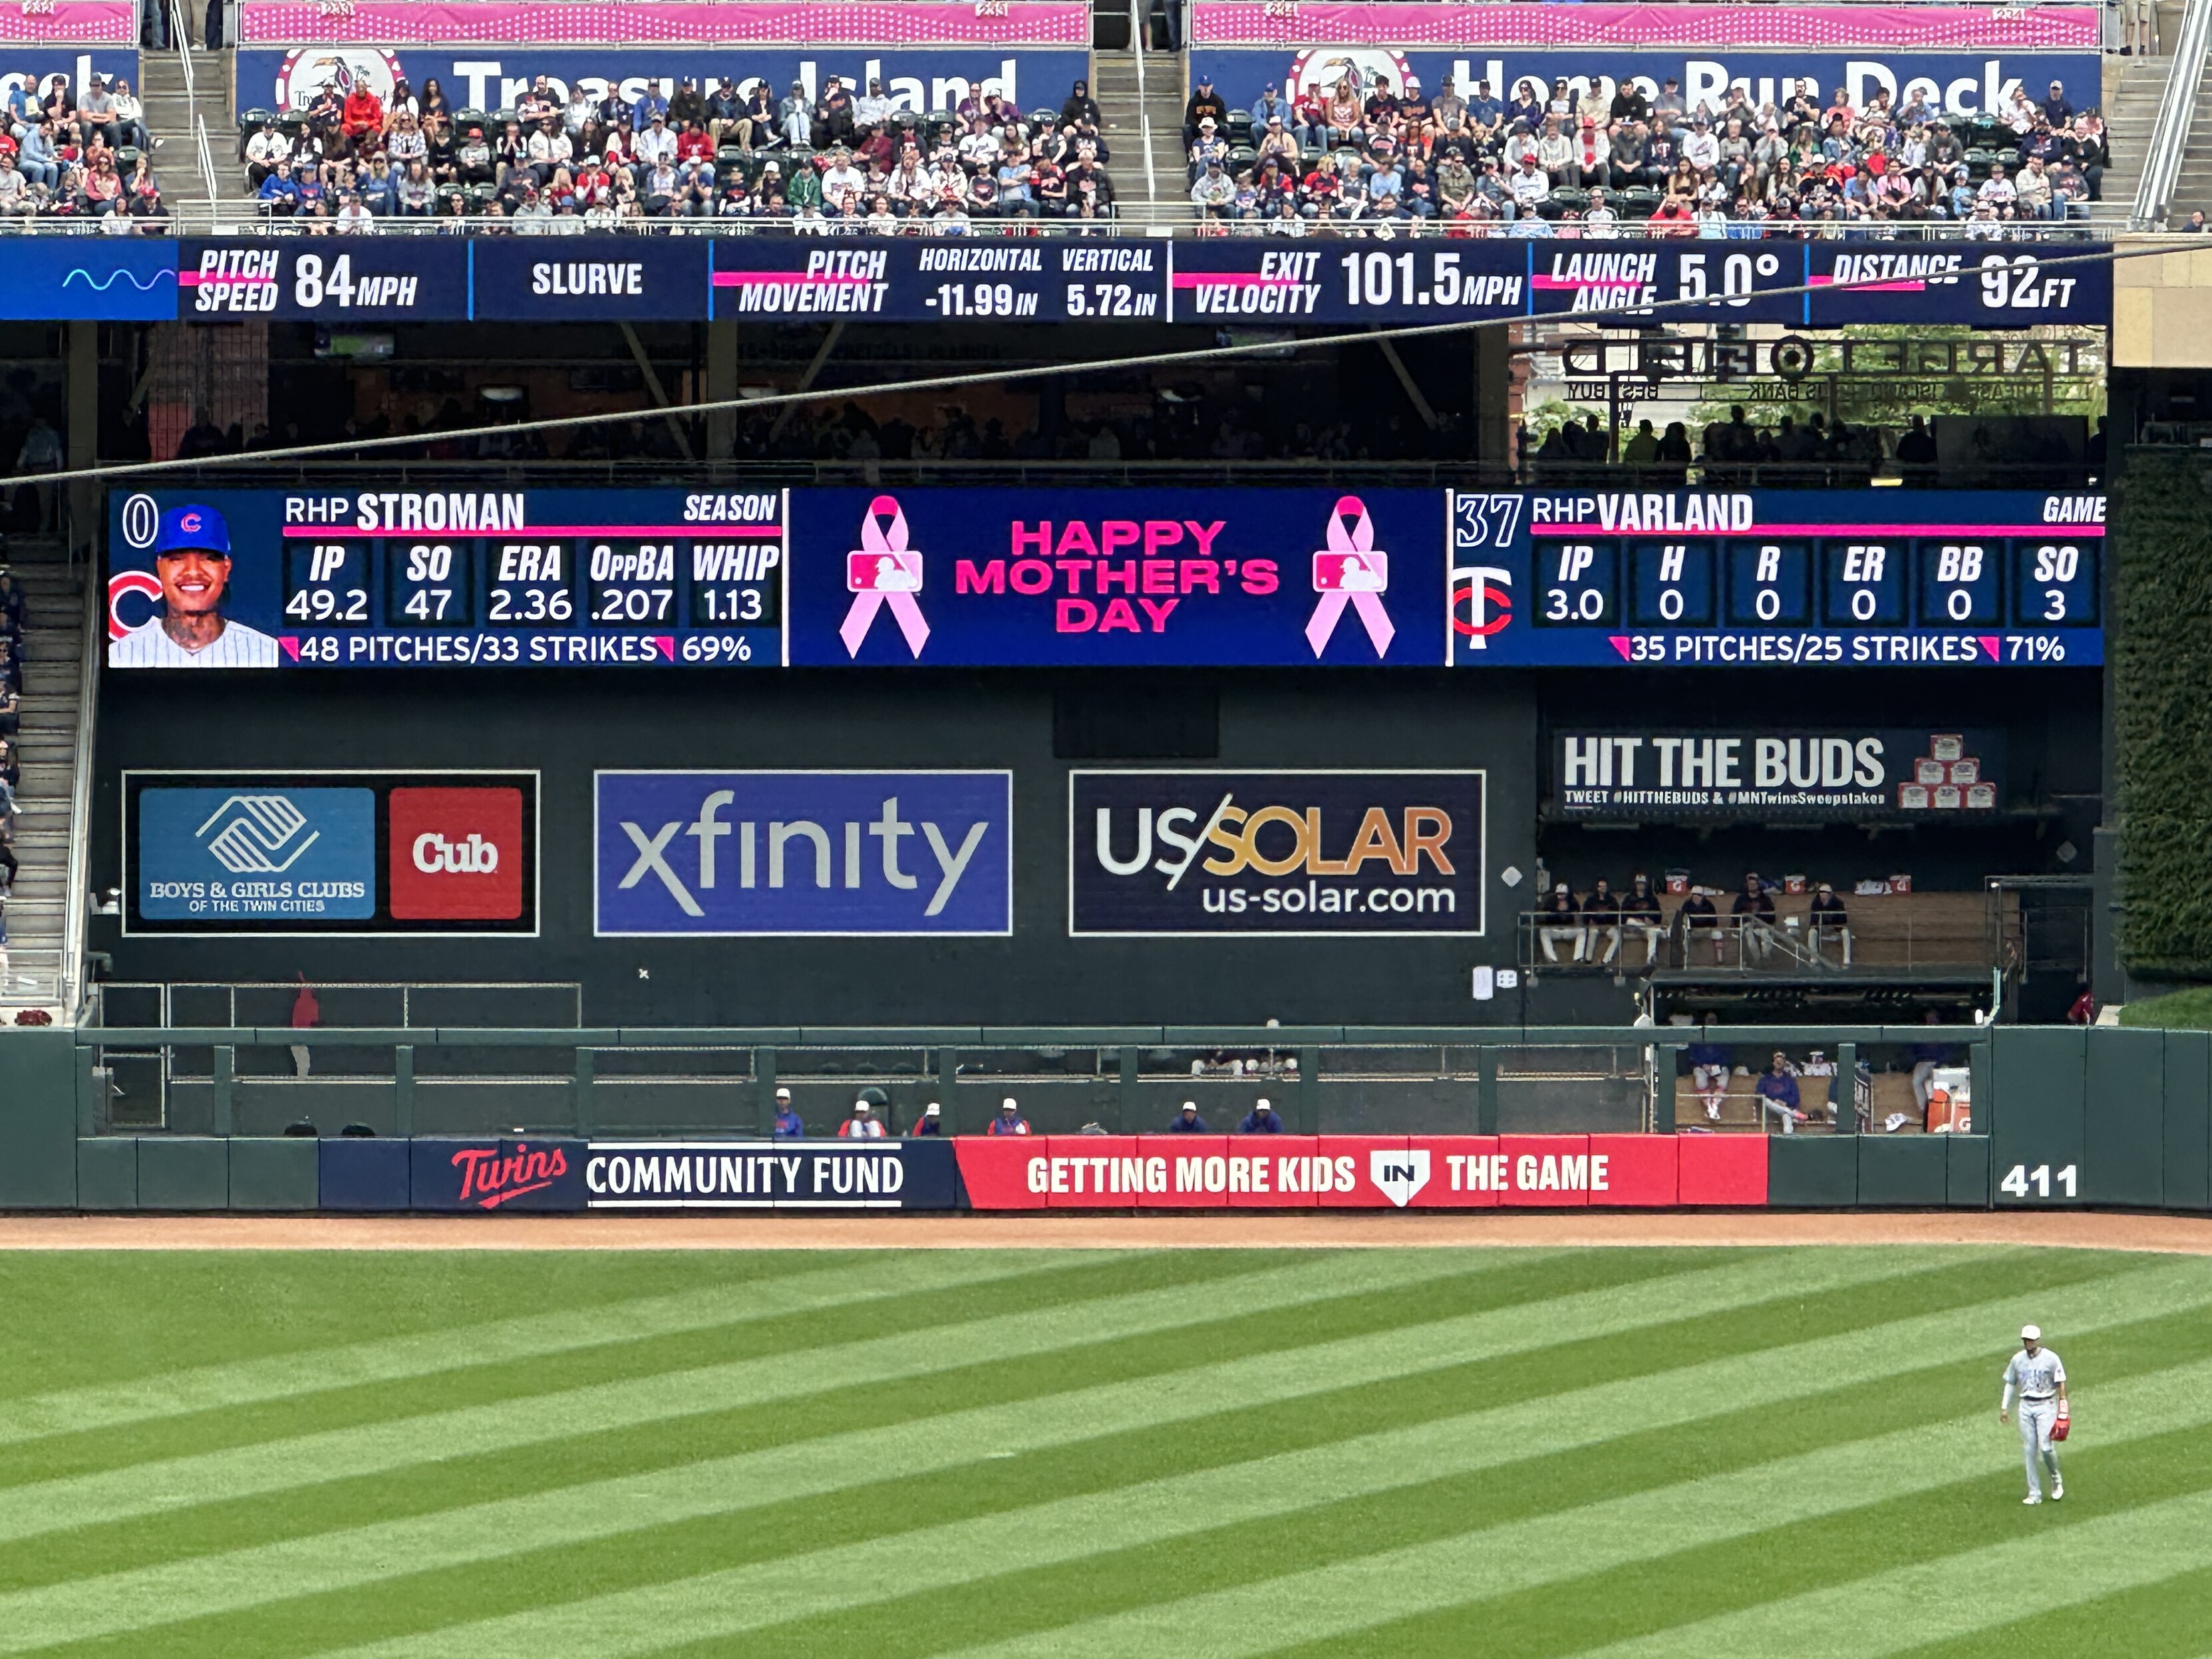 Center field scoreboard at Target Field with lots of pitcher stats